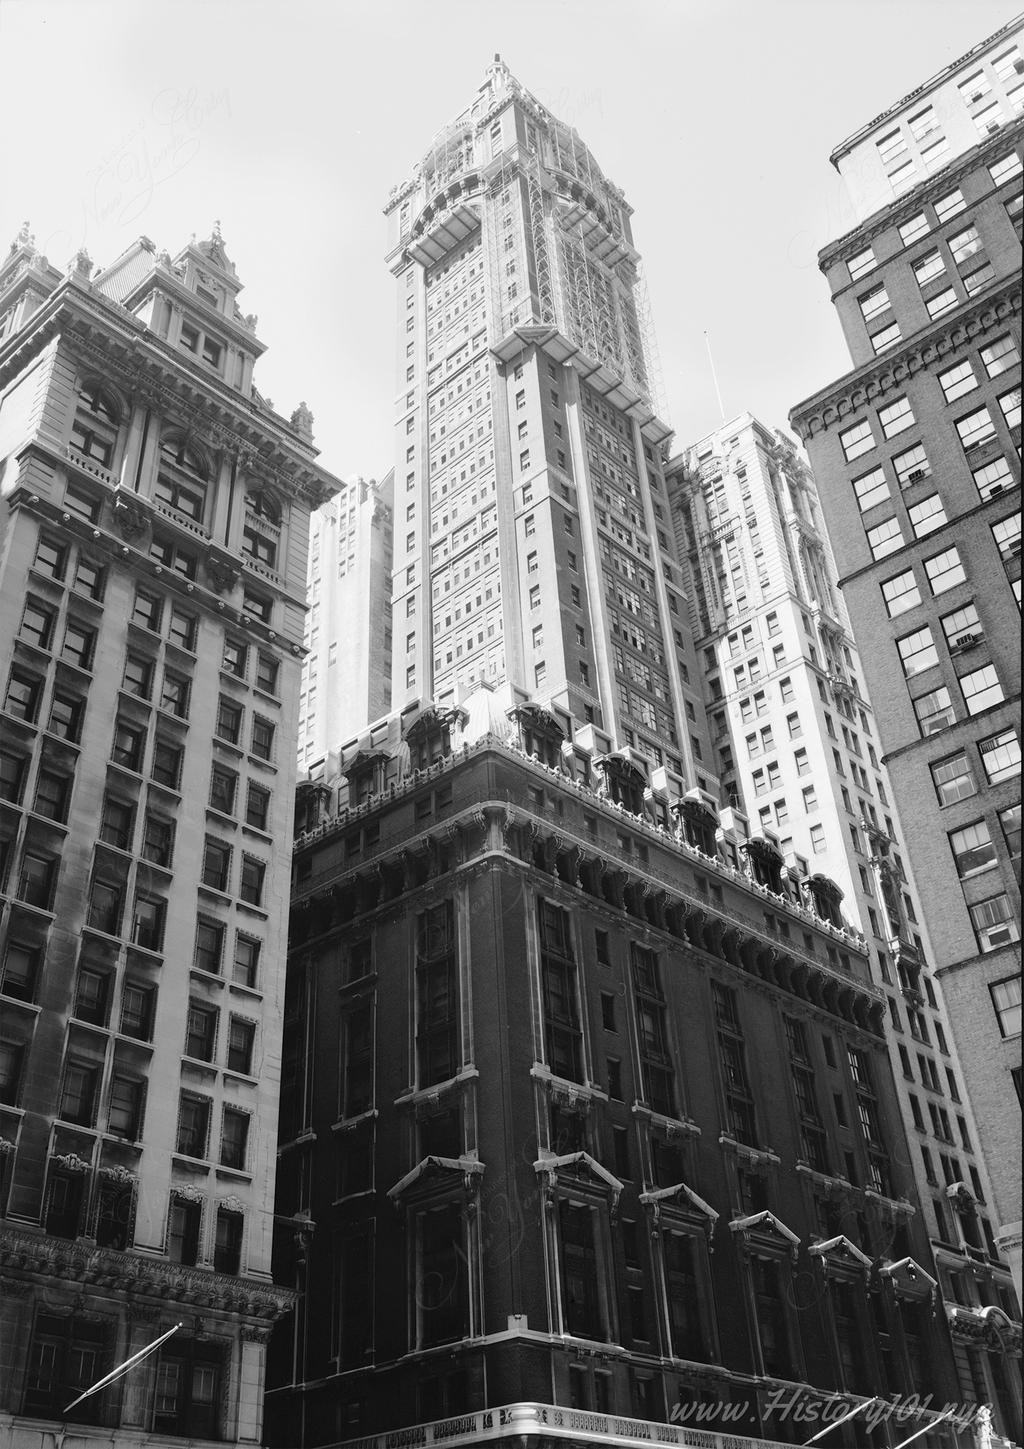 Photograph taken from Broadway, looking up towards the Singer Building.